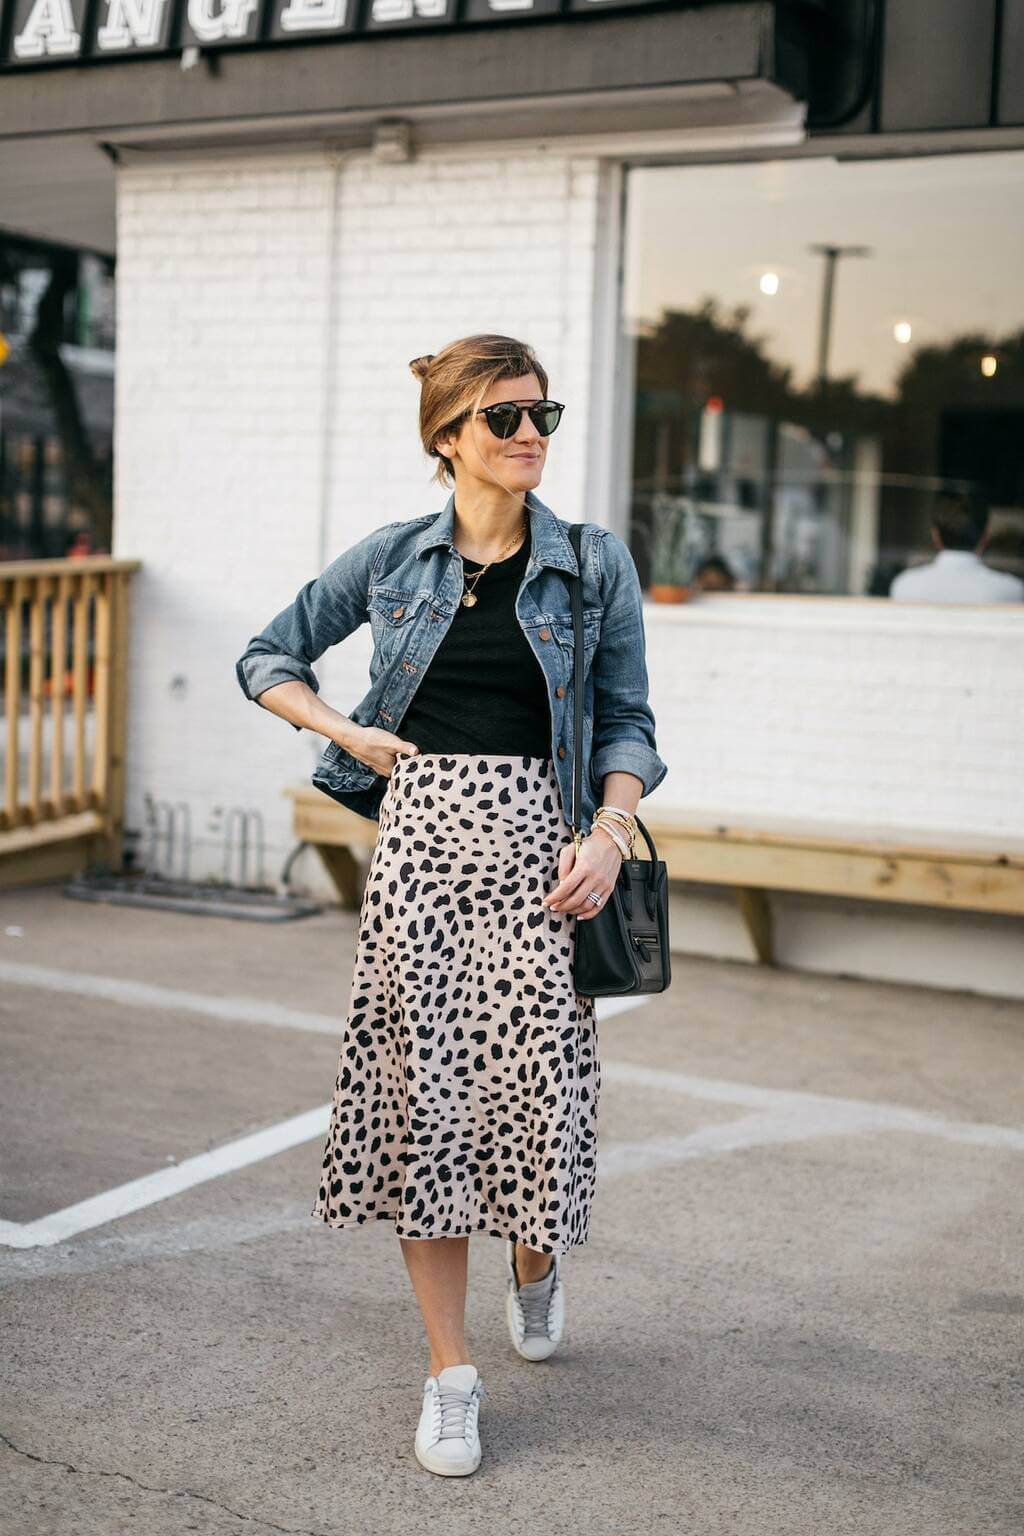 What Is a Midi Skirt and Why Should You Wear One